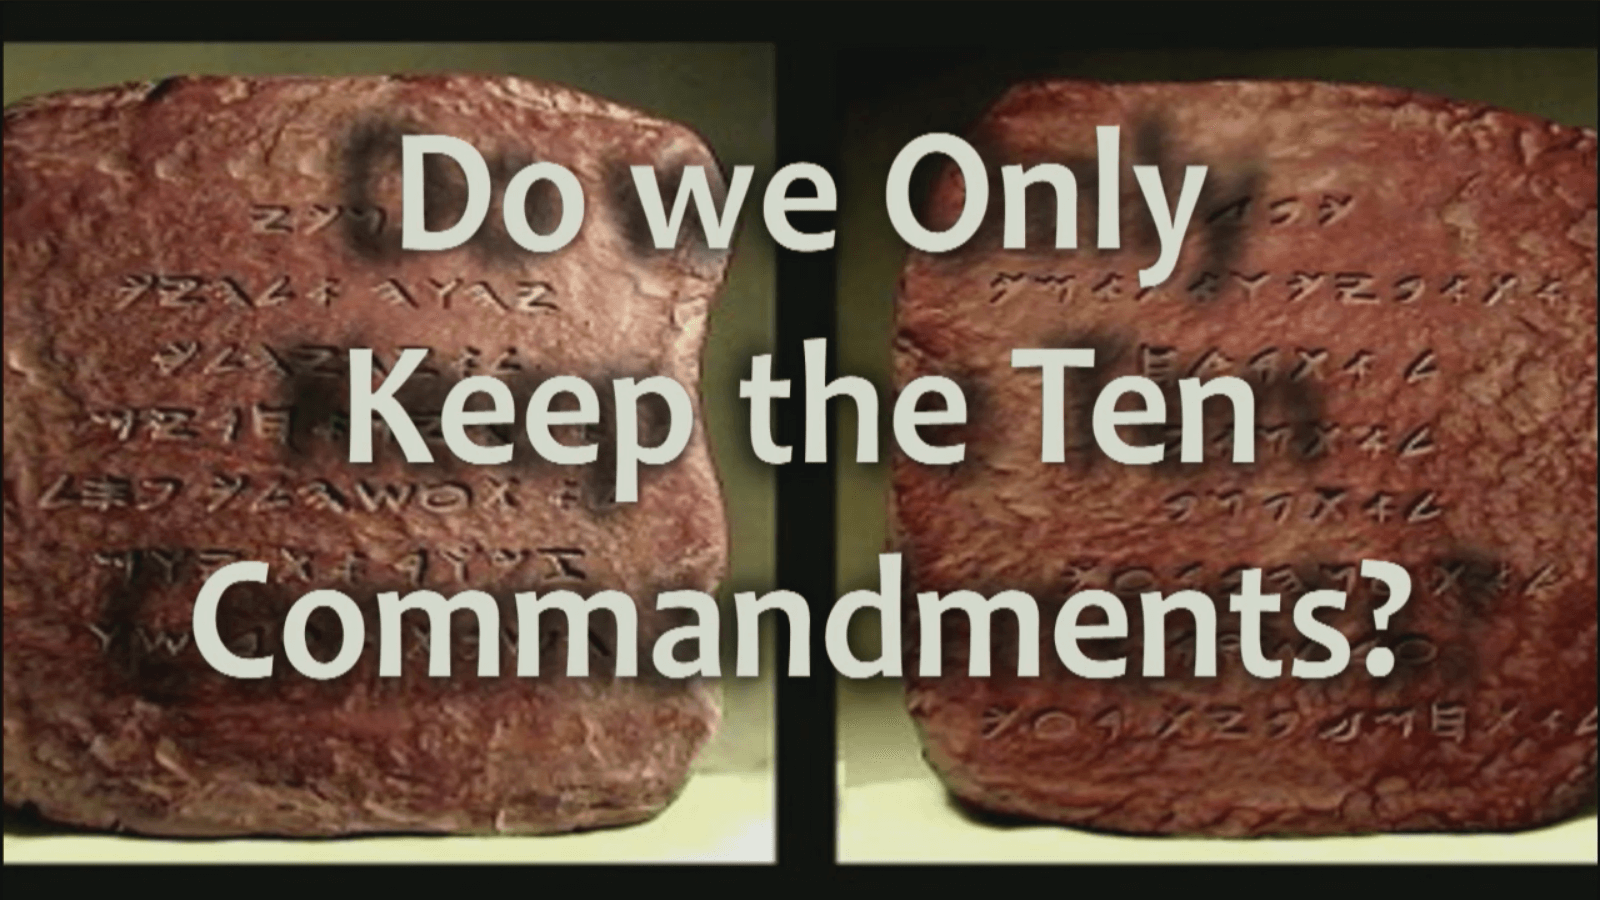 Do we Only Keep the Ten Commandments?